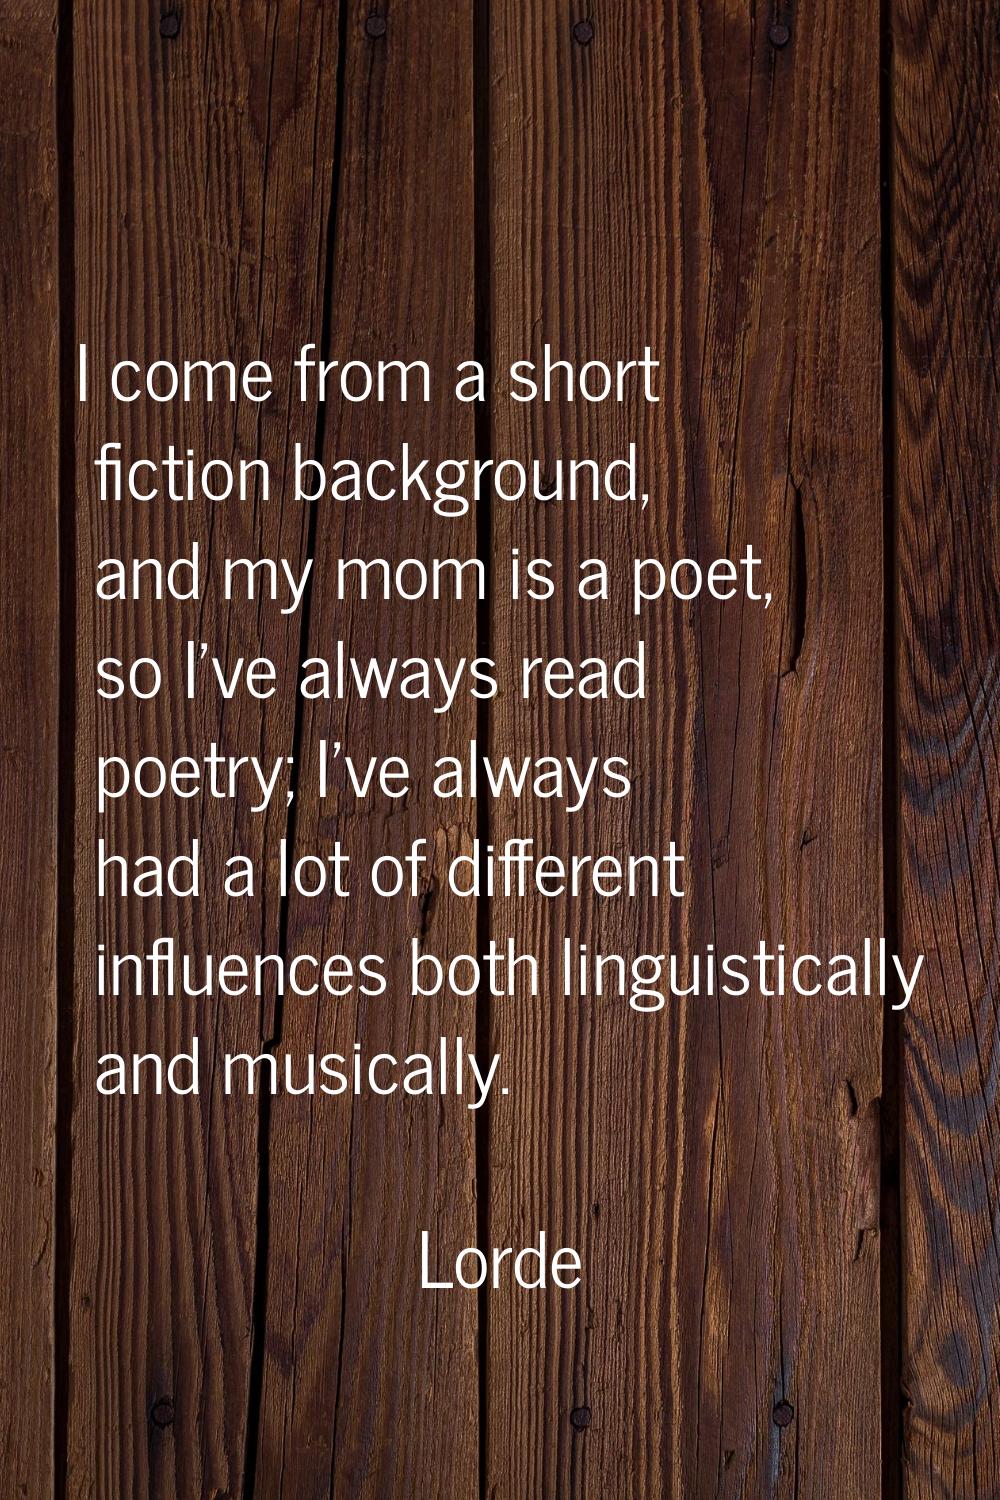 I come from a short fiction background, and my mom is a poet, so I've always read poetry; I've alwa